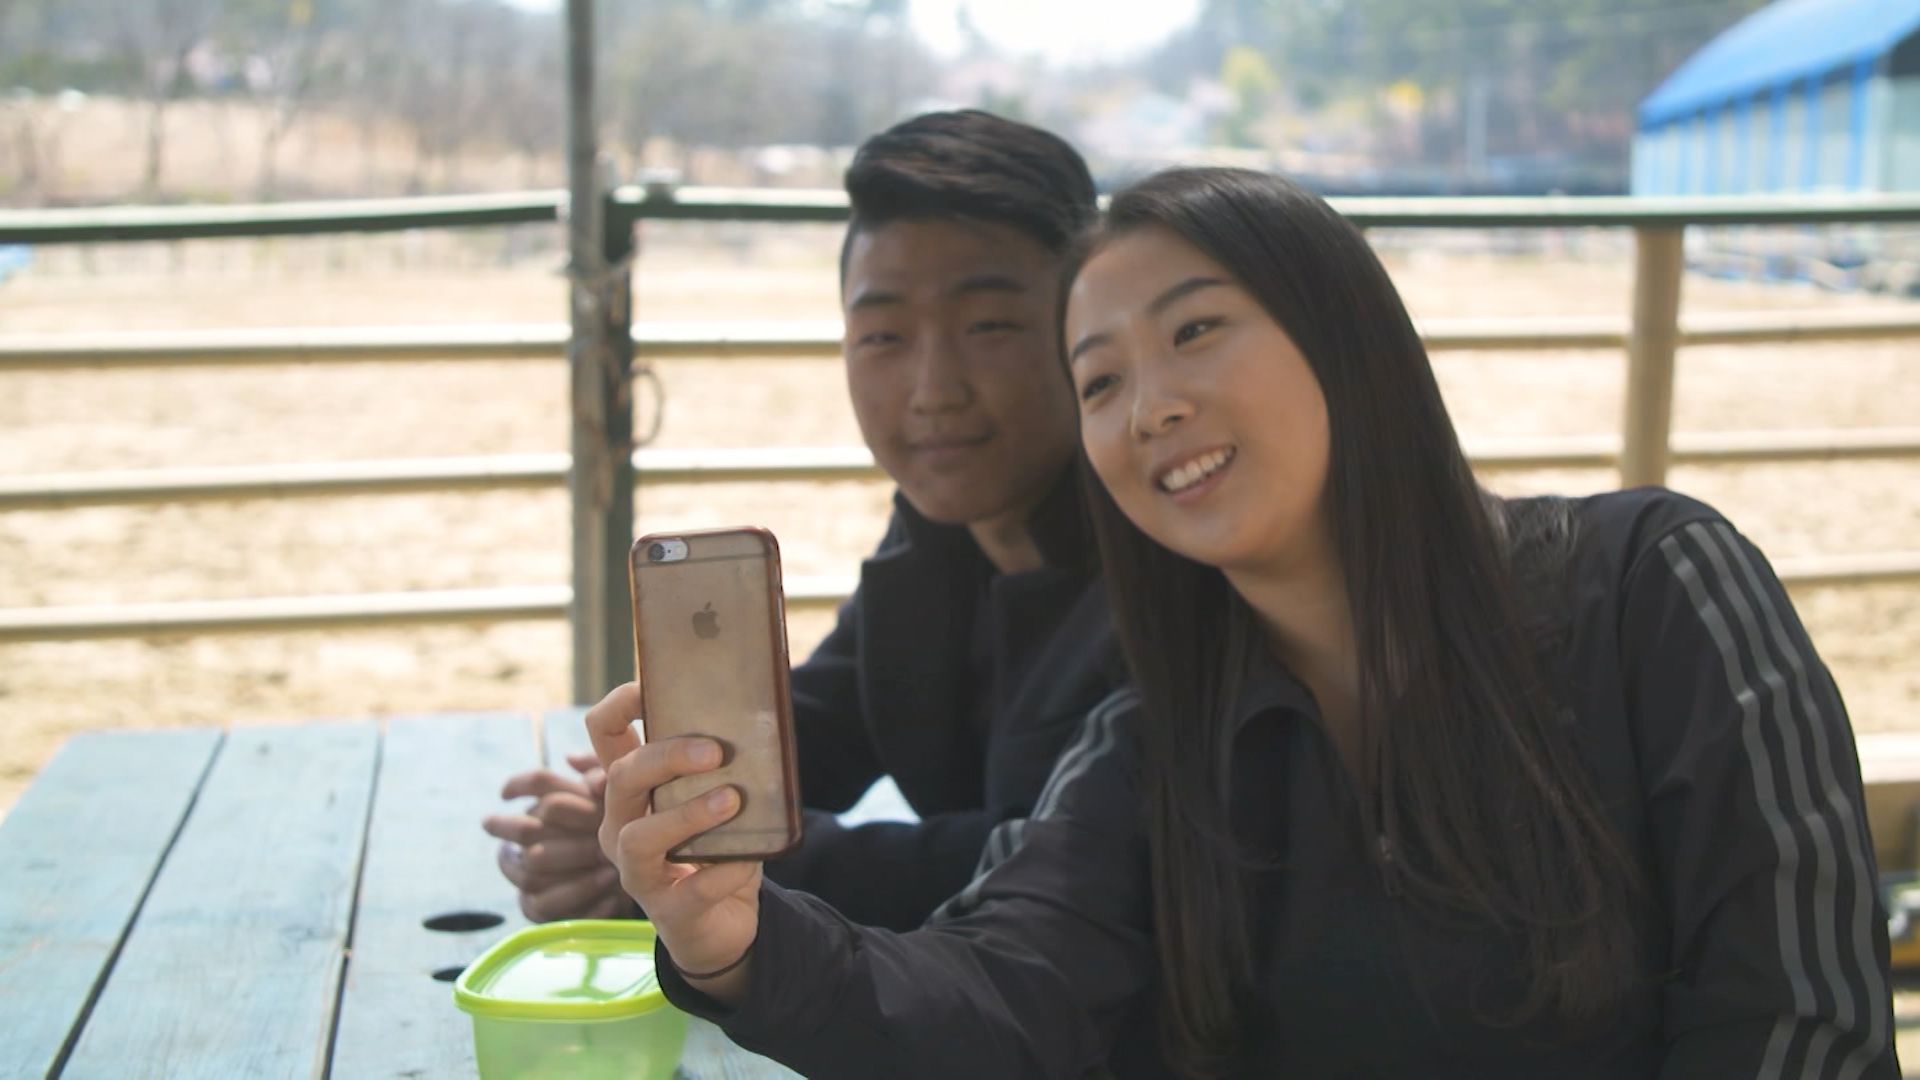 School Girl Six Marthi - Why young South Koreans aren't interested in dating | CNN